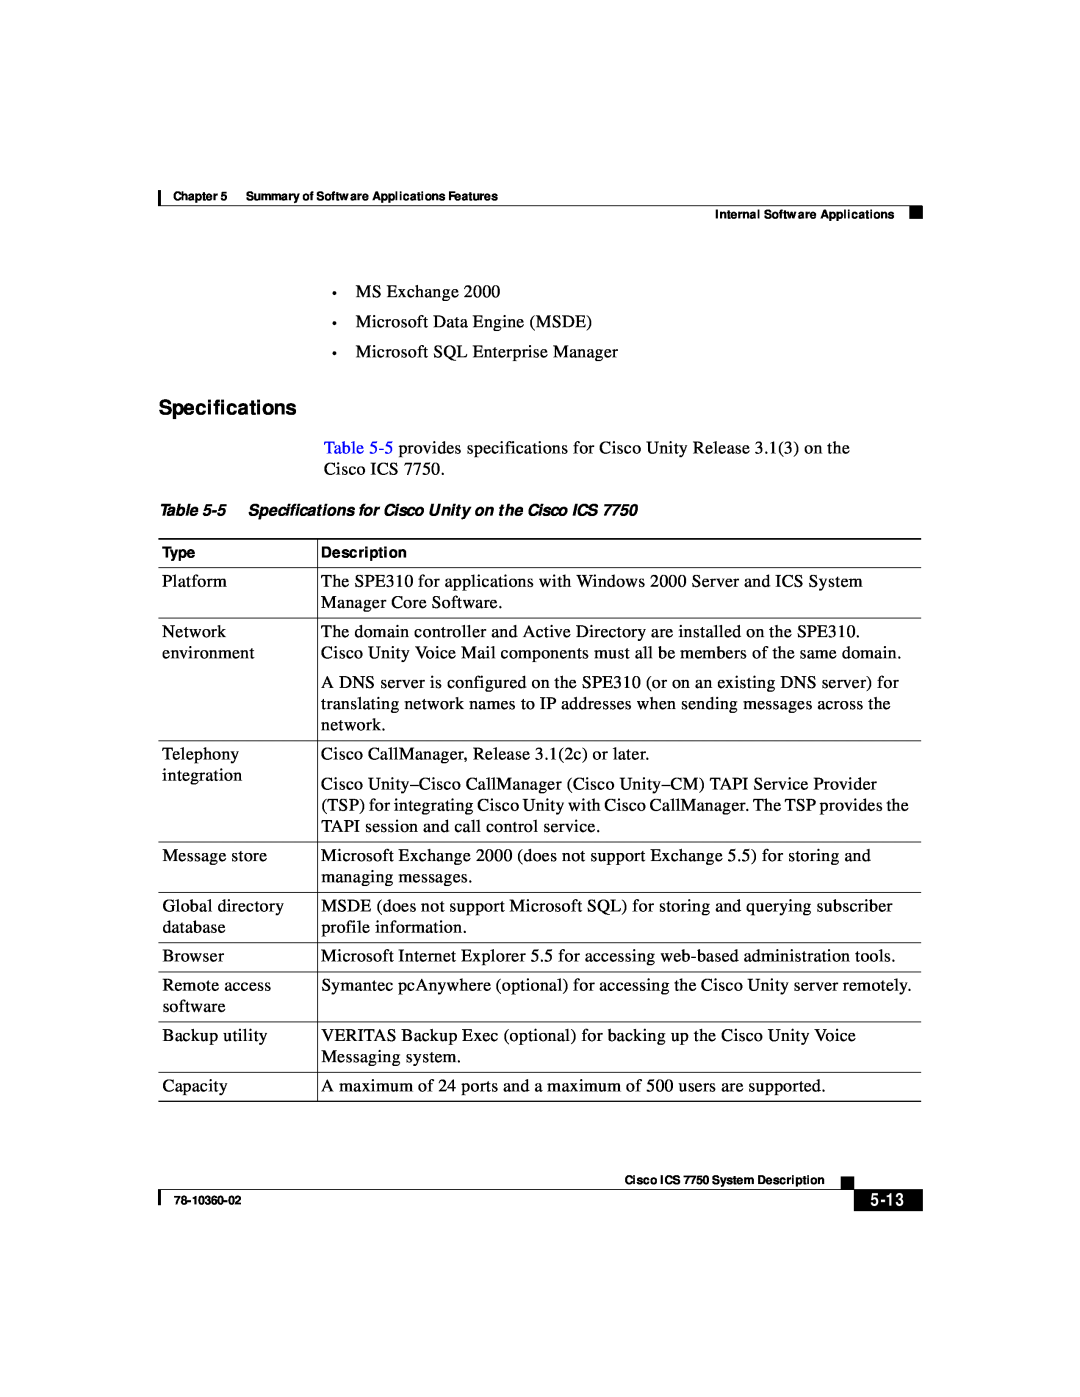 Cisco Systems ICS-7750 manual 5-13, 5 Specifications for Cisco Unity on the Cisco ICS 